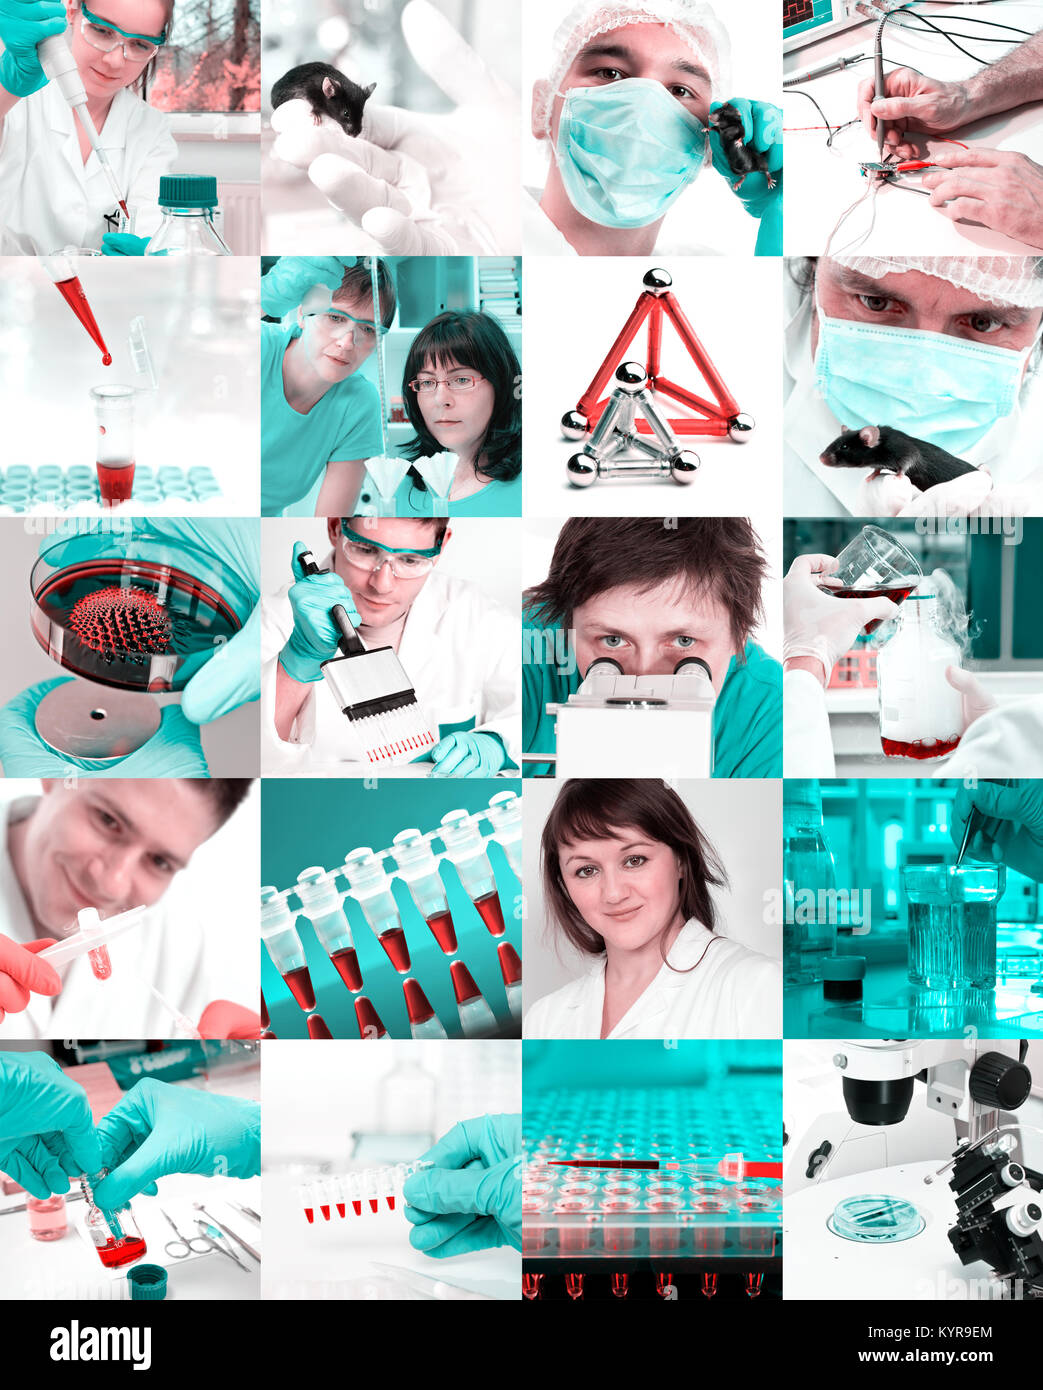 Scientists working in the lab, collage Stock Photo